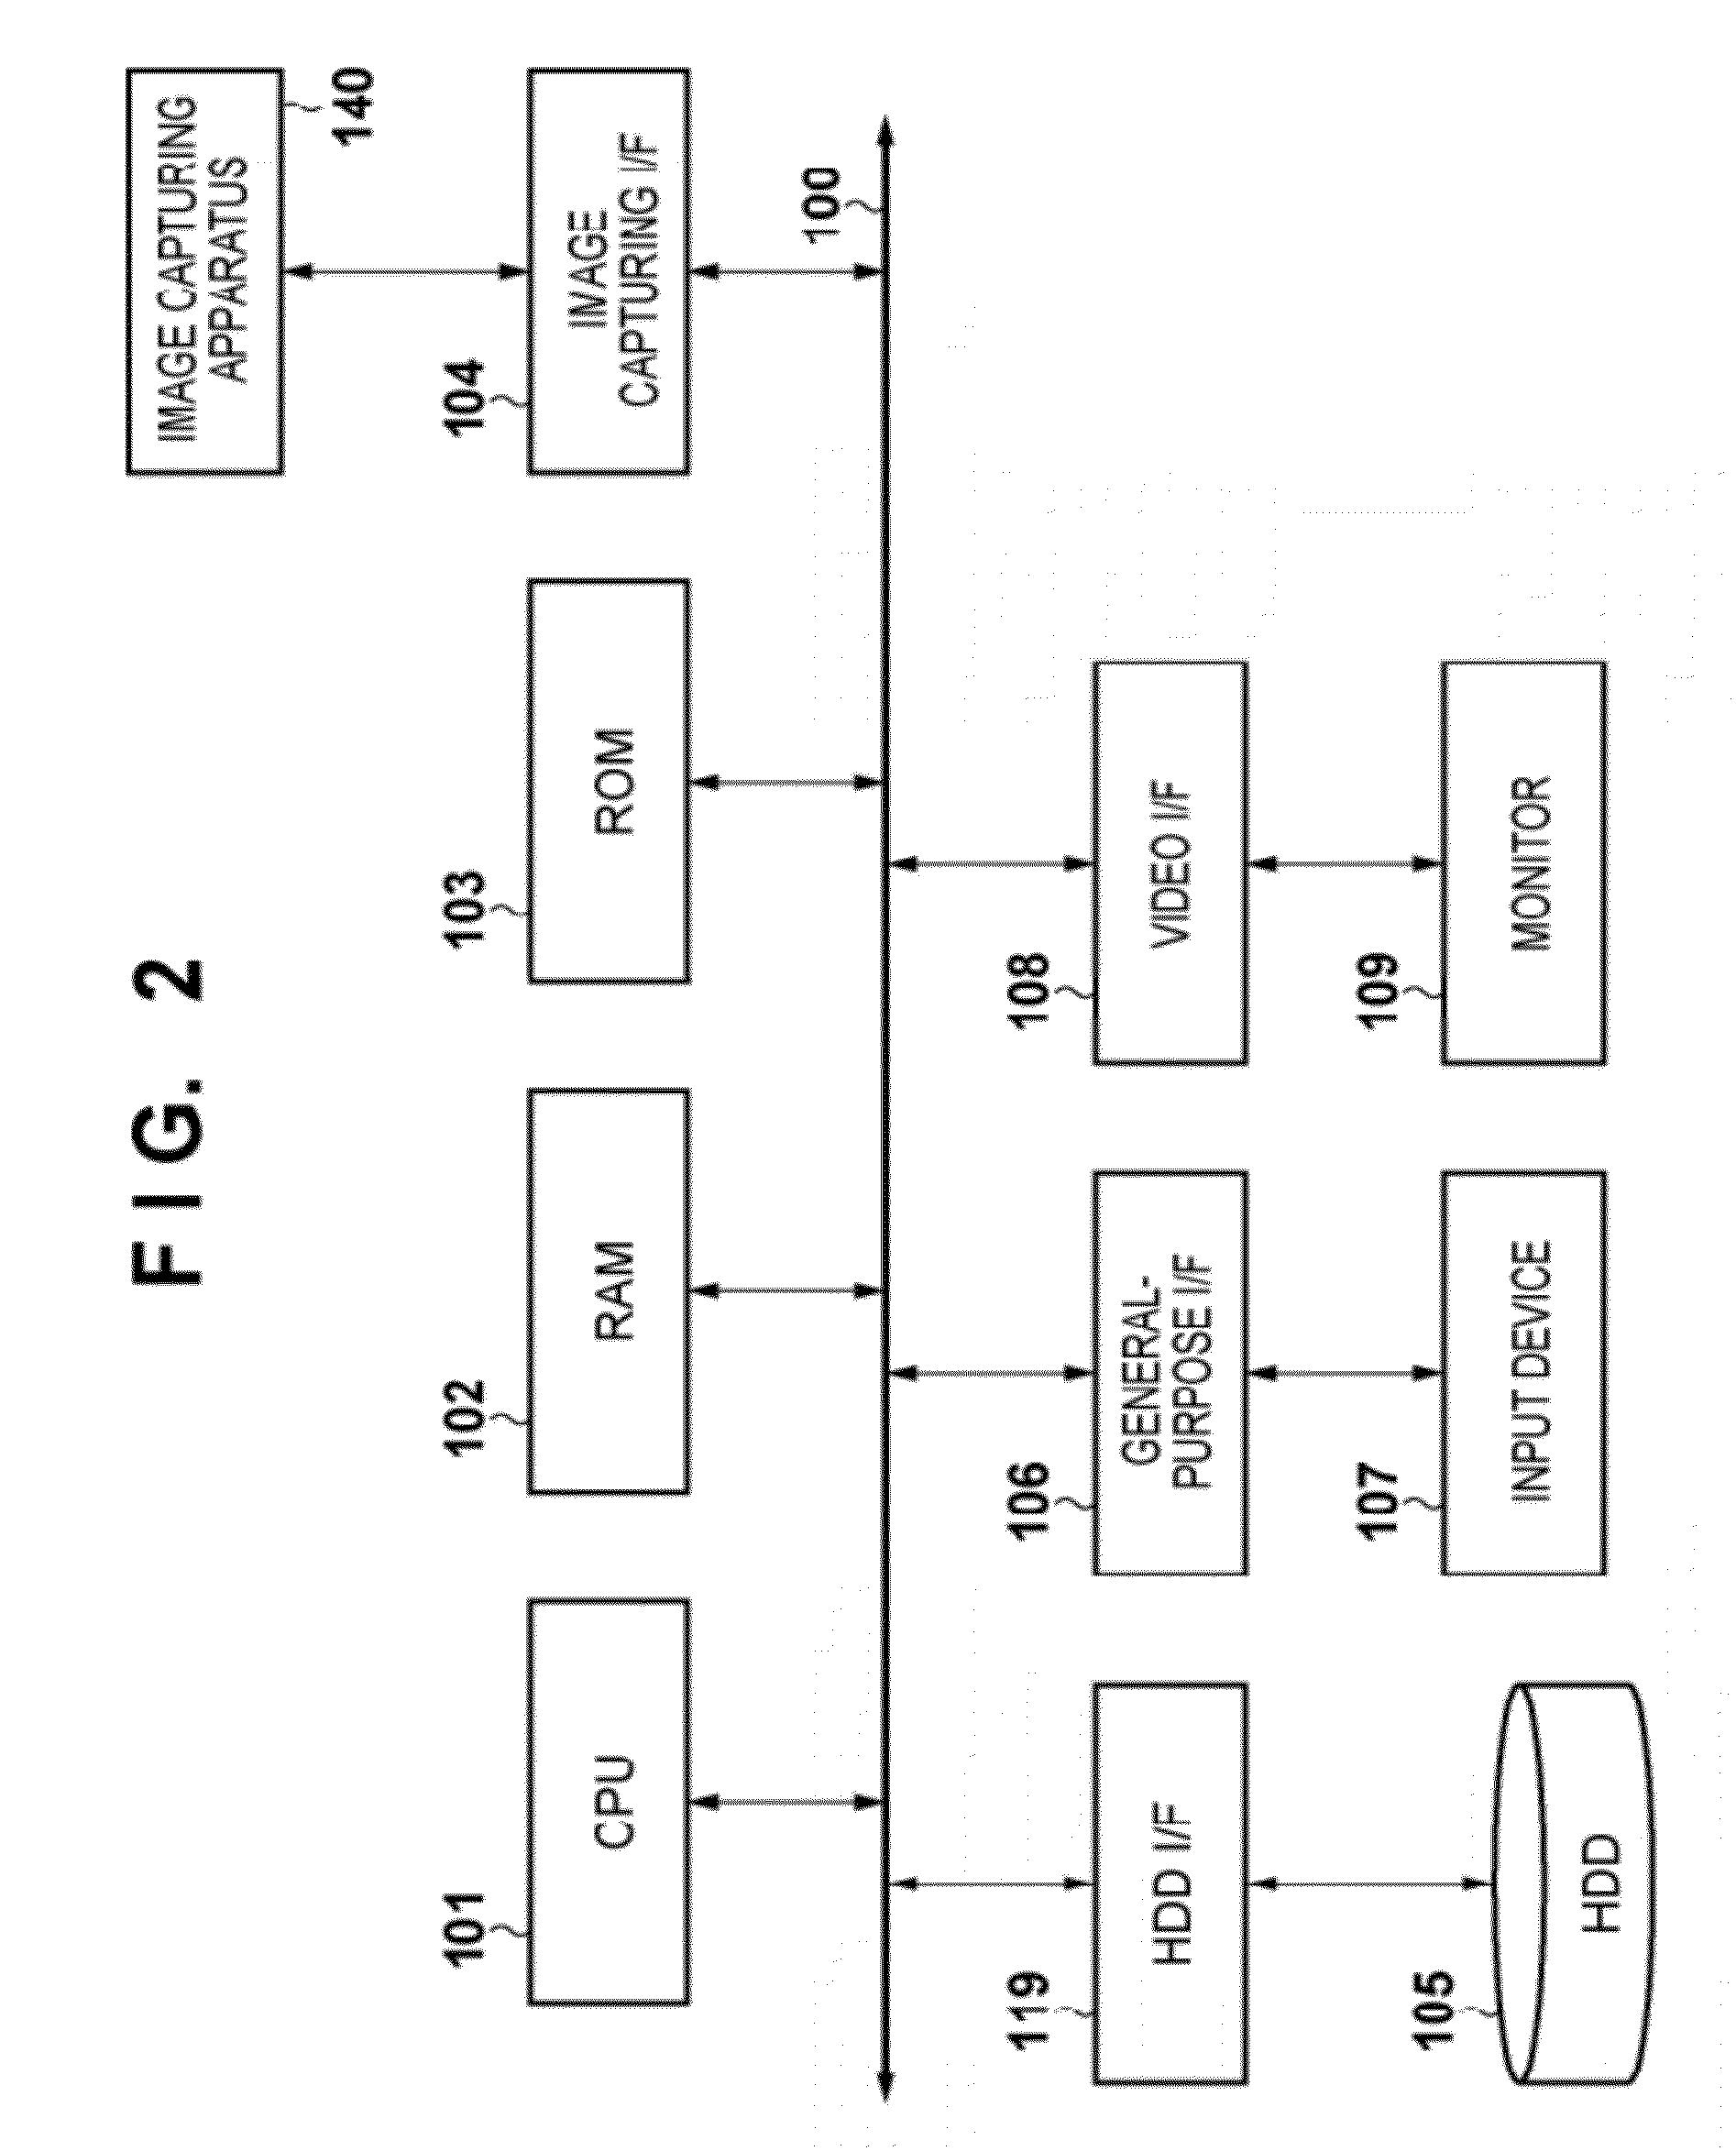 Image capturing apparatus, image processing apparatus, and method thereof